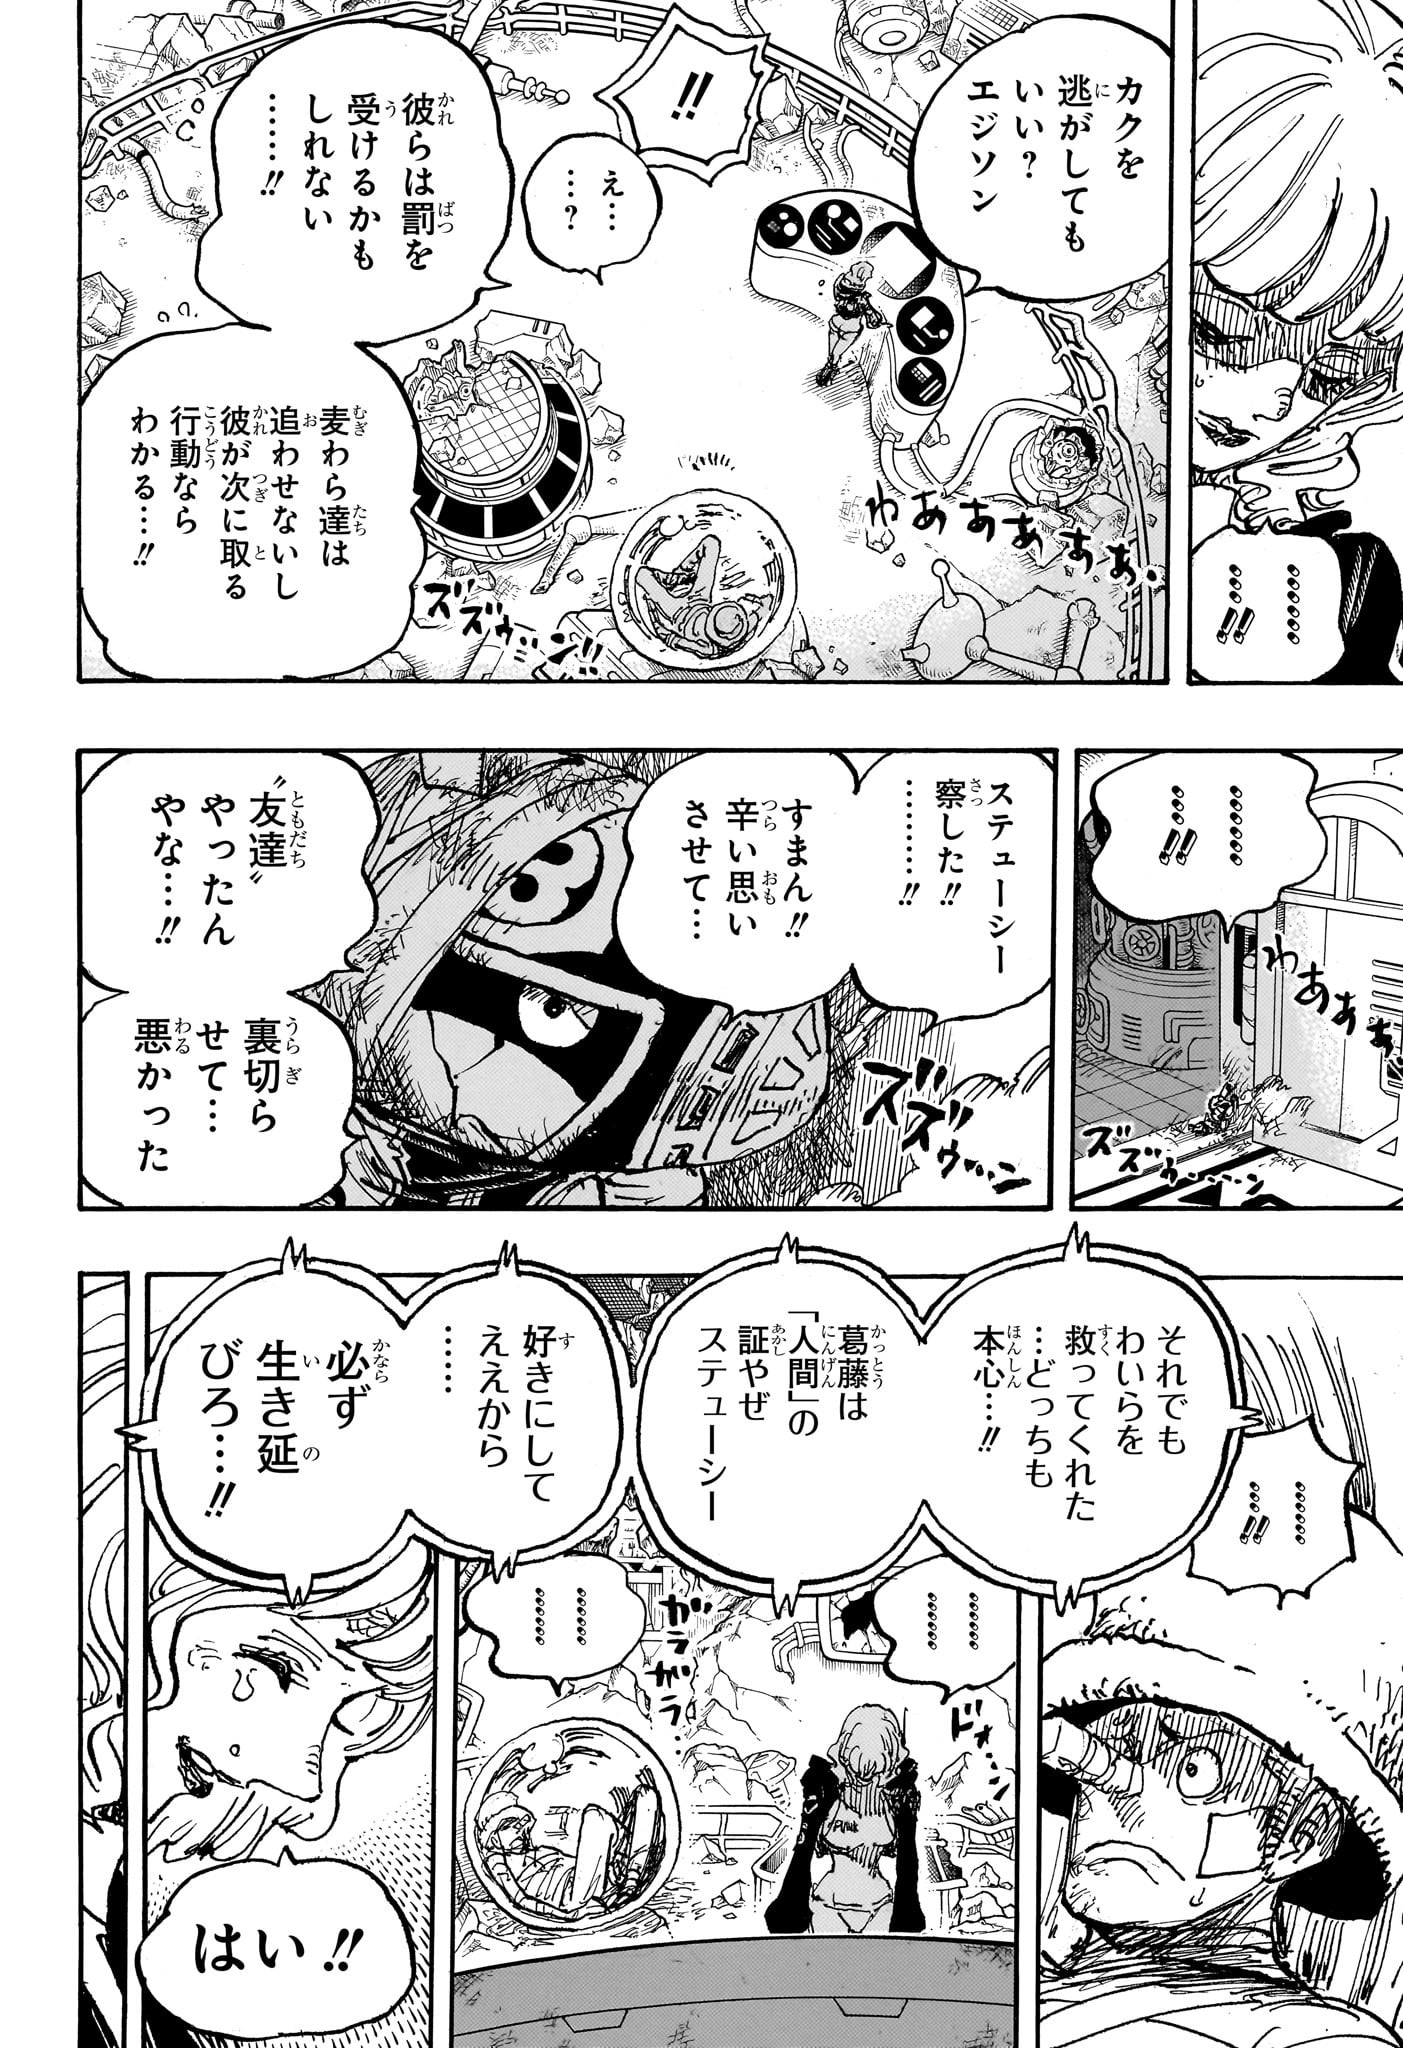 One Piece - Chapter 1116 - Page 6